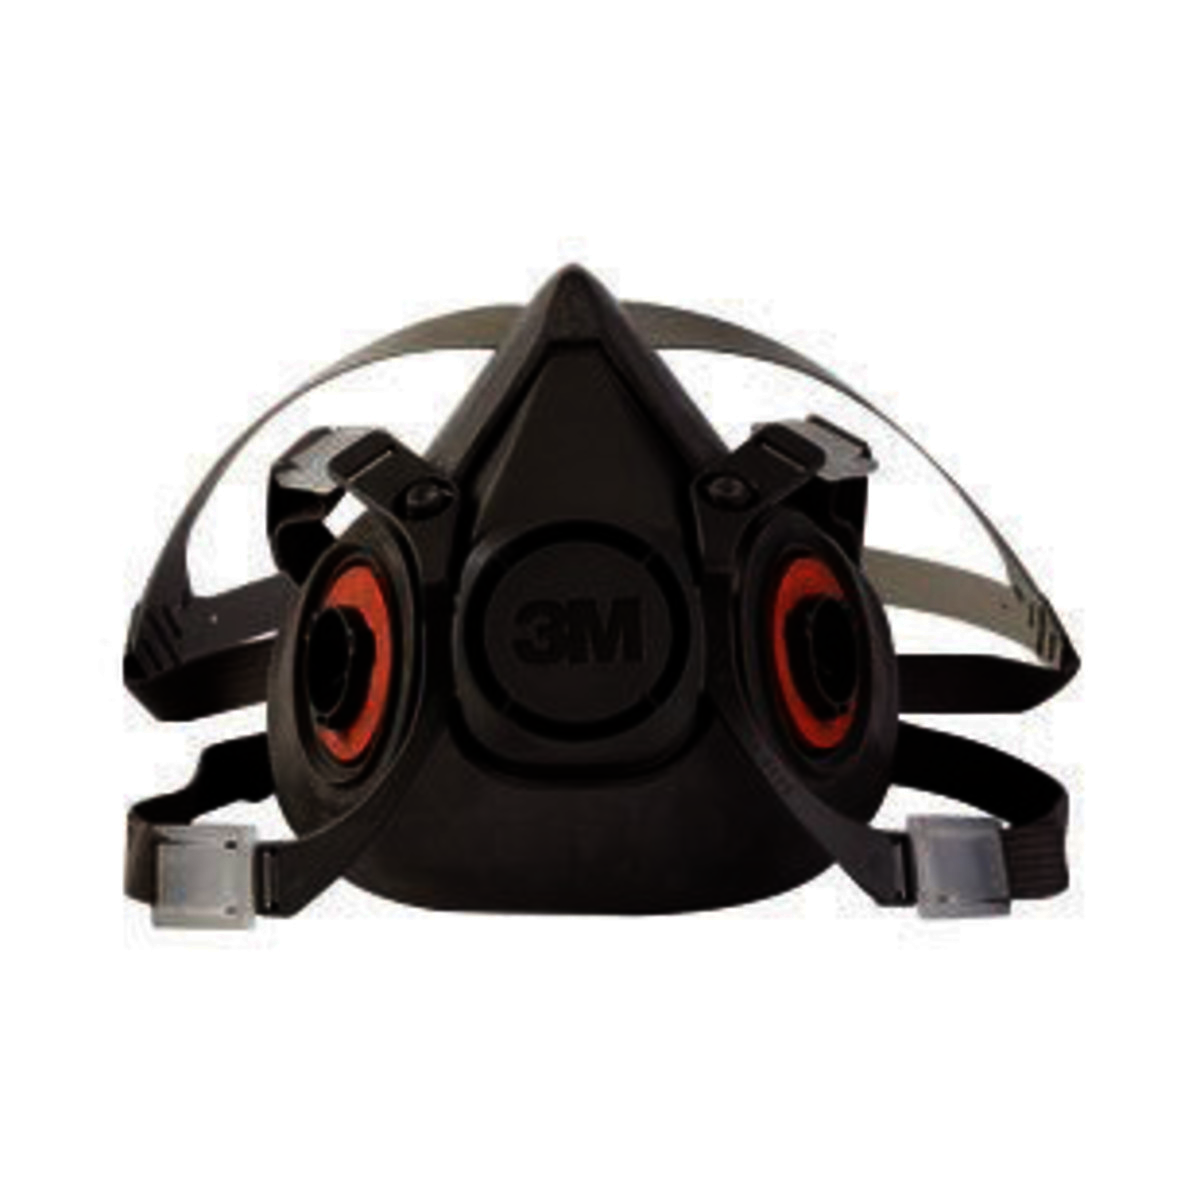 3M 7500 Series Half Face Respirator with P100 Filters